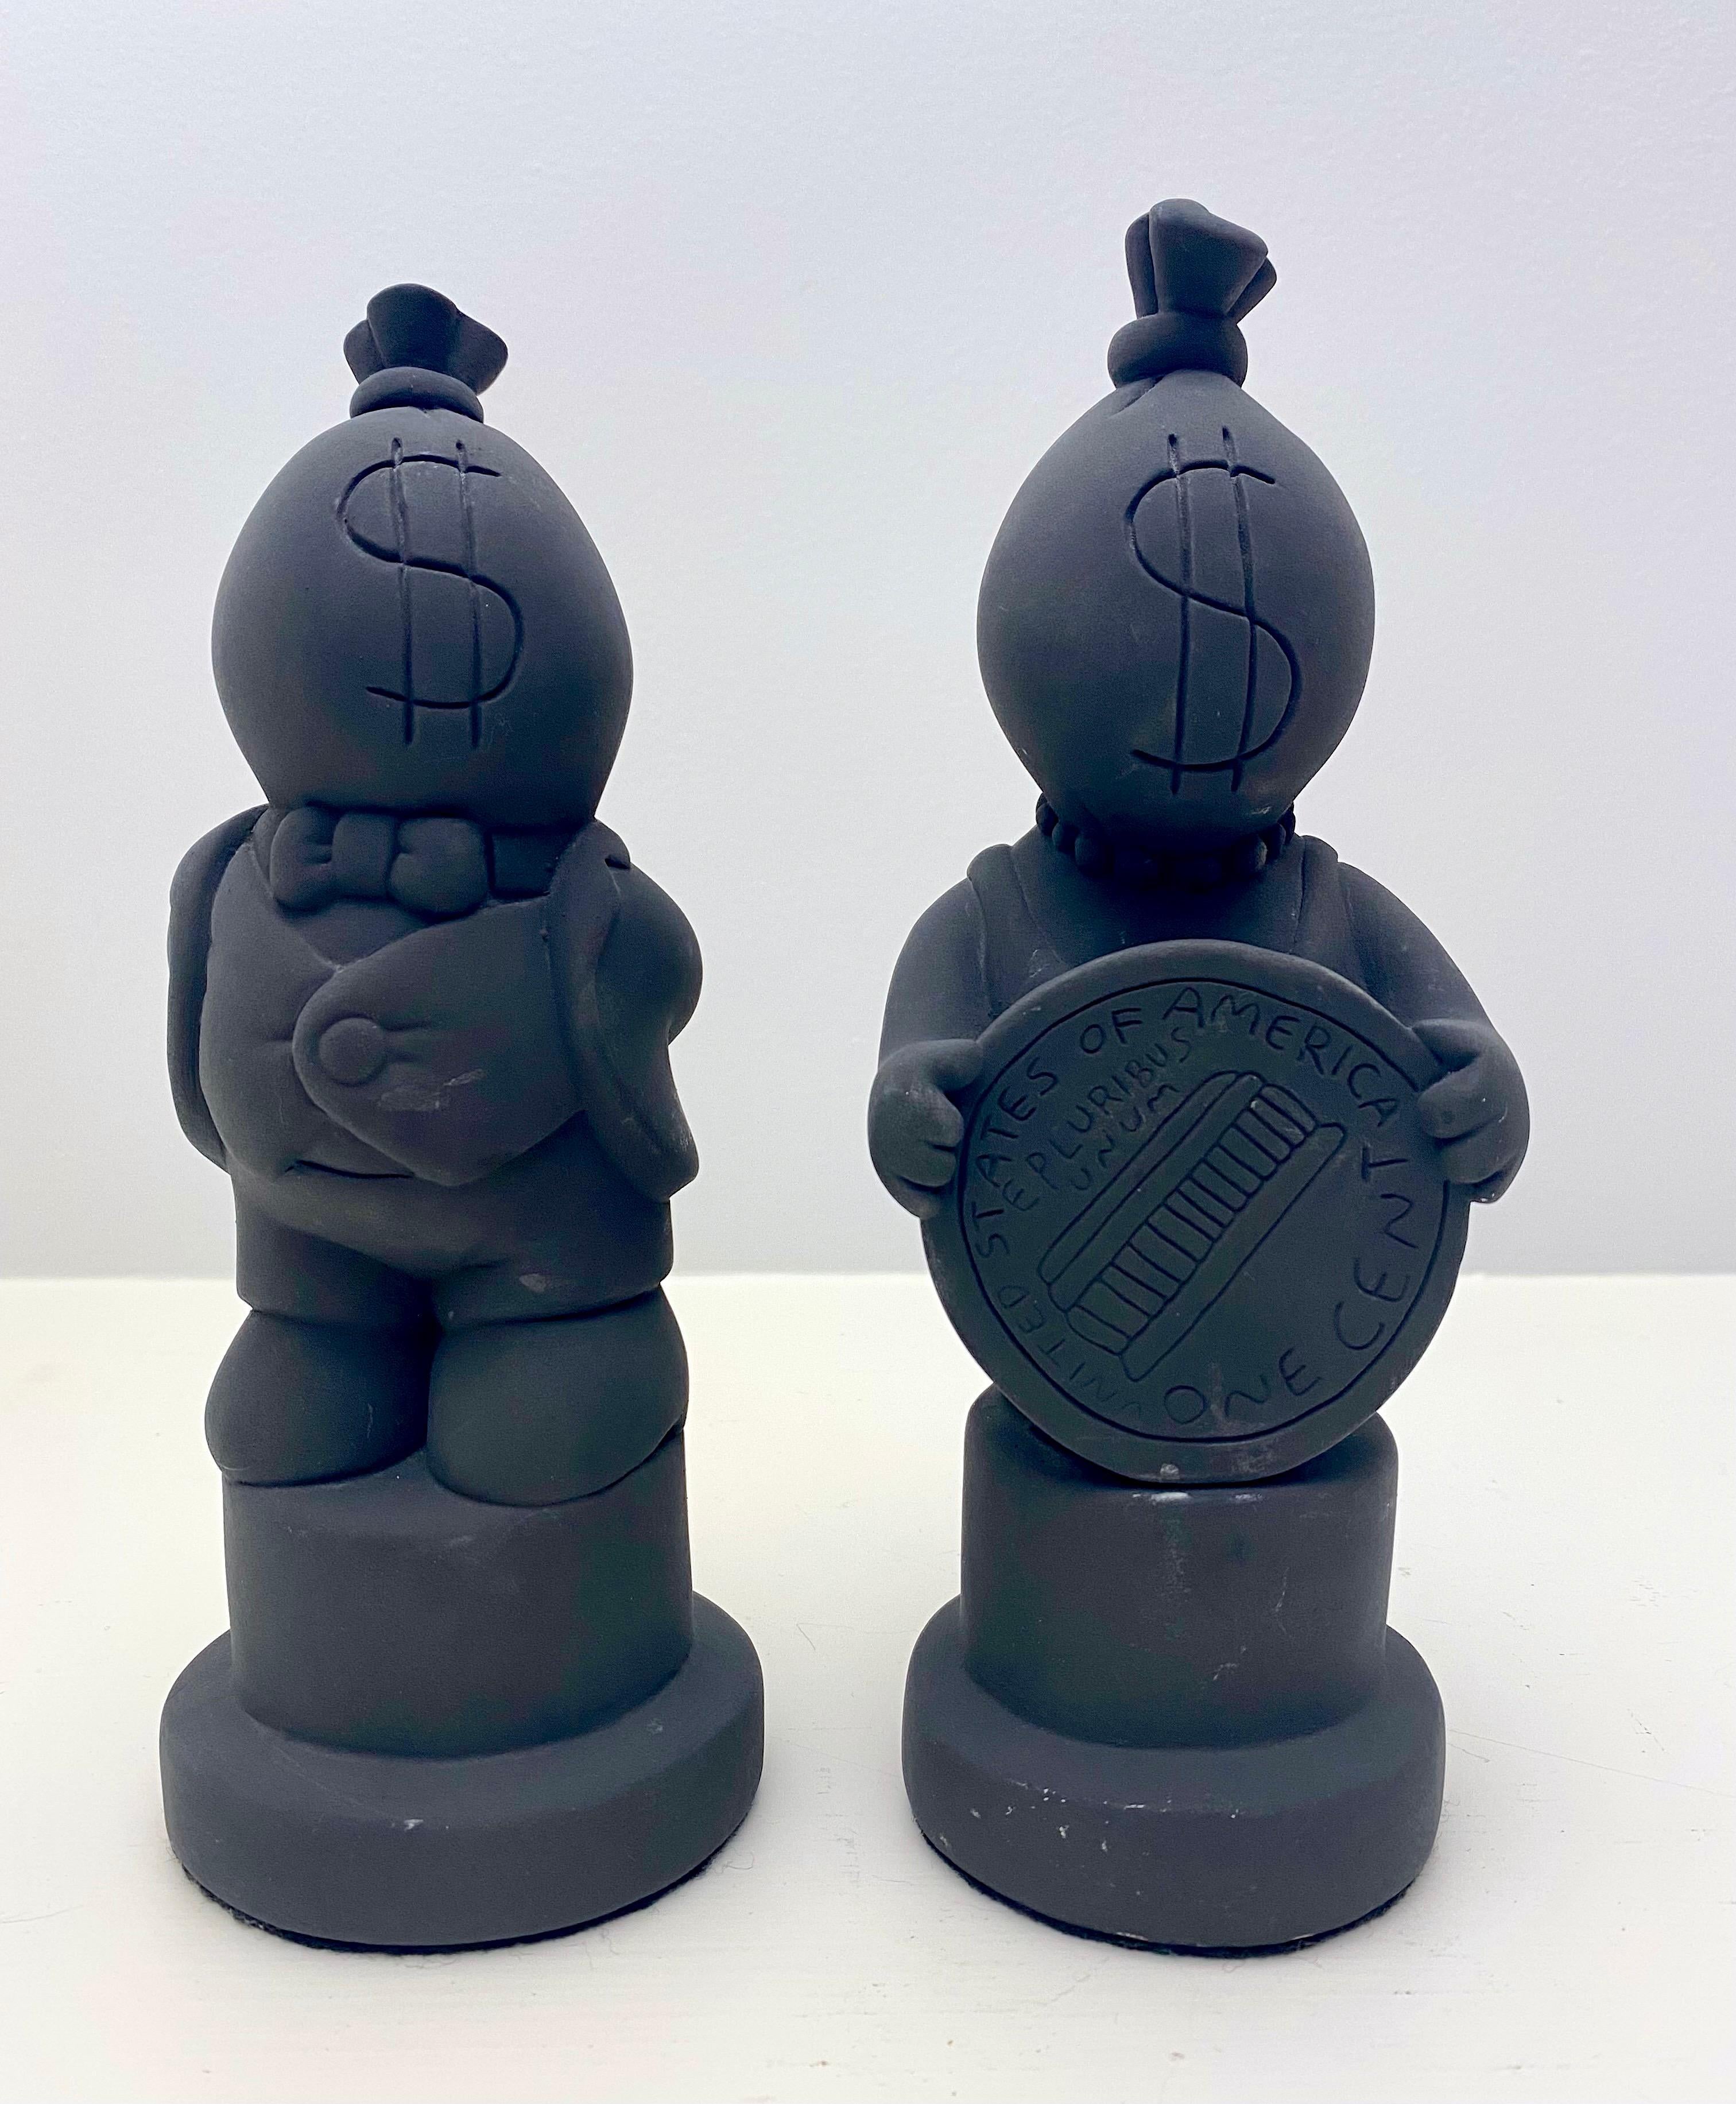 Fun pair of Tom Otterness King and Queen Plaster Sculptures in matte black. Signed on the back. 
Tom Otterness (born 1952) is an American sculptor best known as one of America's most prolific public artists. Otterness's works adorn parks, plazas,